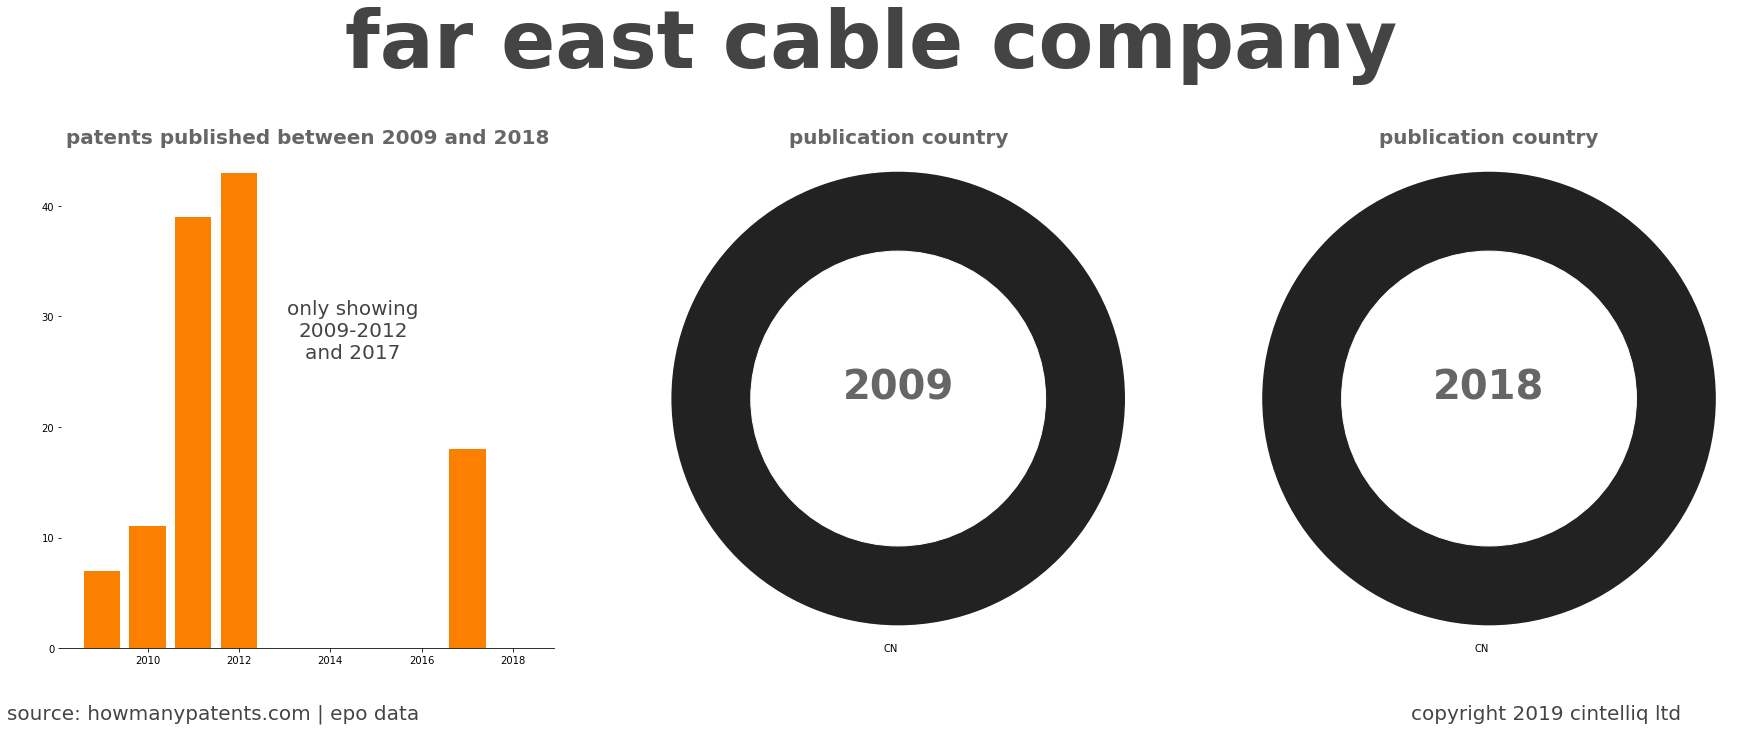 summary of patents for Far East Cable Company